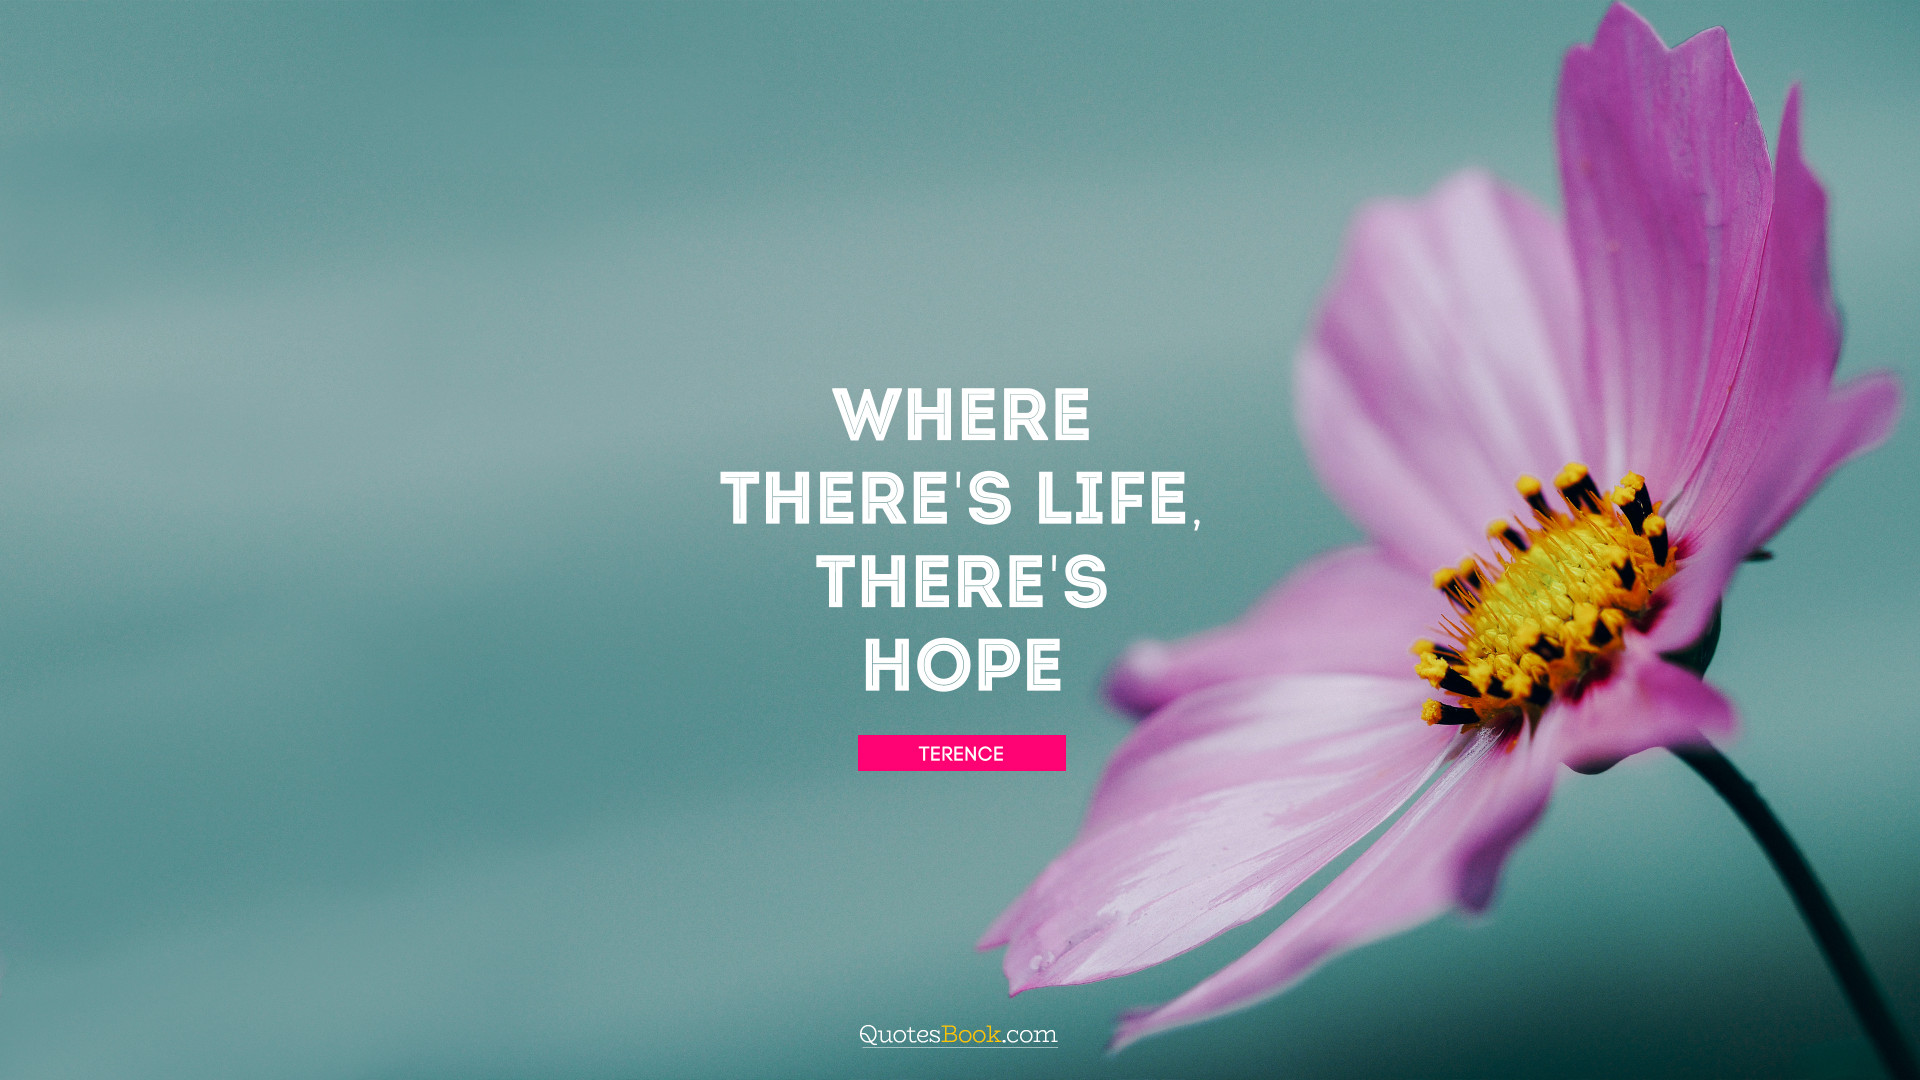 Where there's life, there's hope. - Quote by Terence - QuotesBook